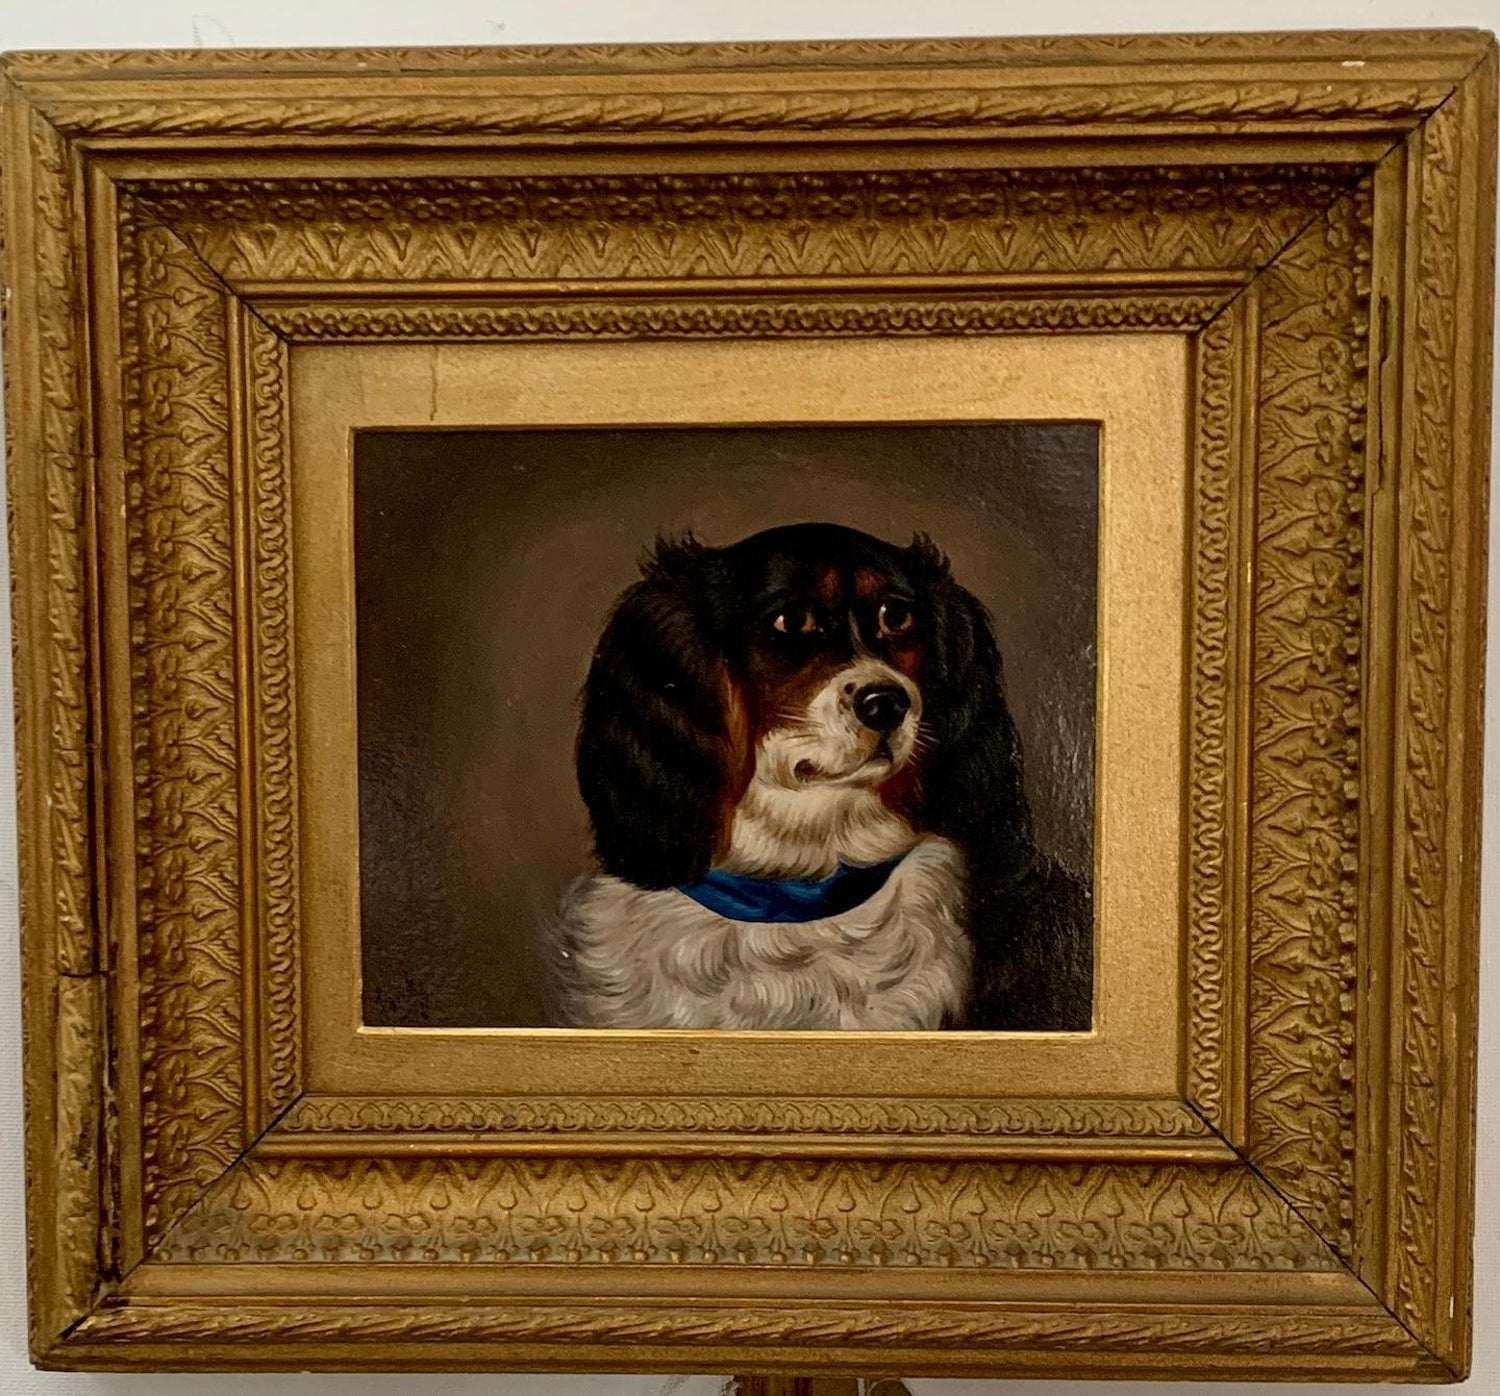 Antique Cavalier King Charles Spaniel Paintings - 8 For Sale on 1stDibs |  paintings by king charles, king charles paintings, king charles cavaliers  for sale